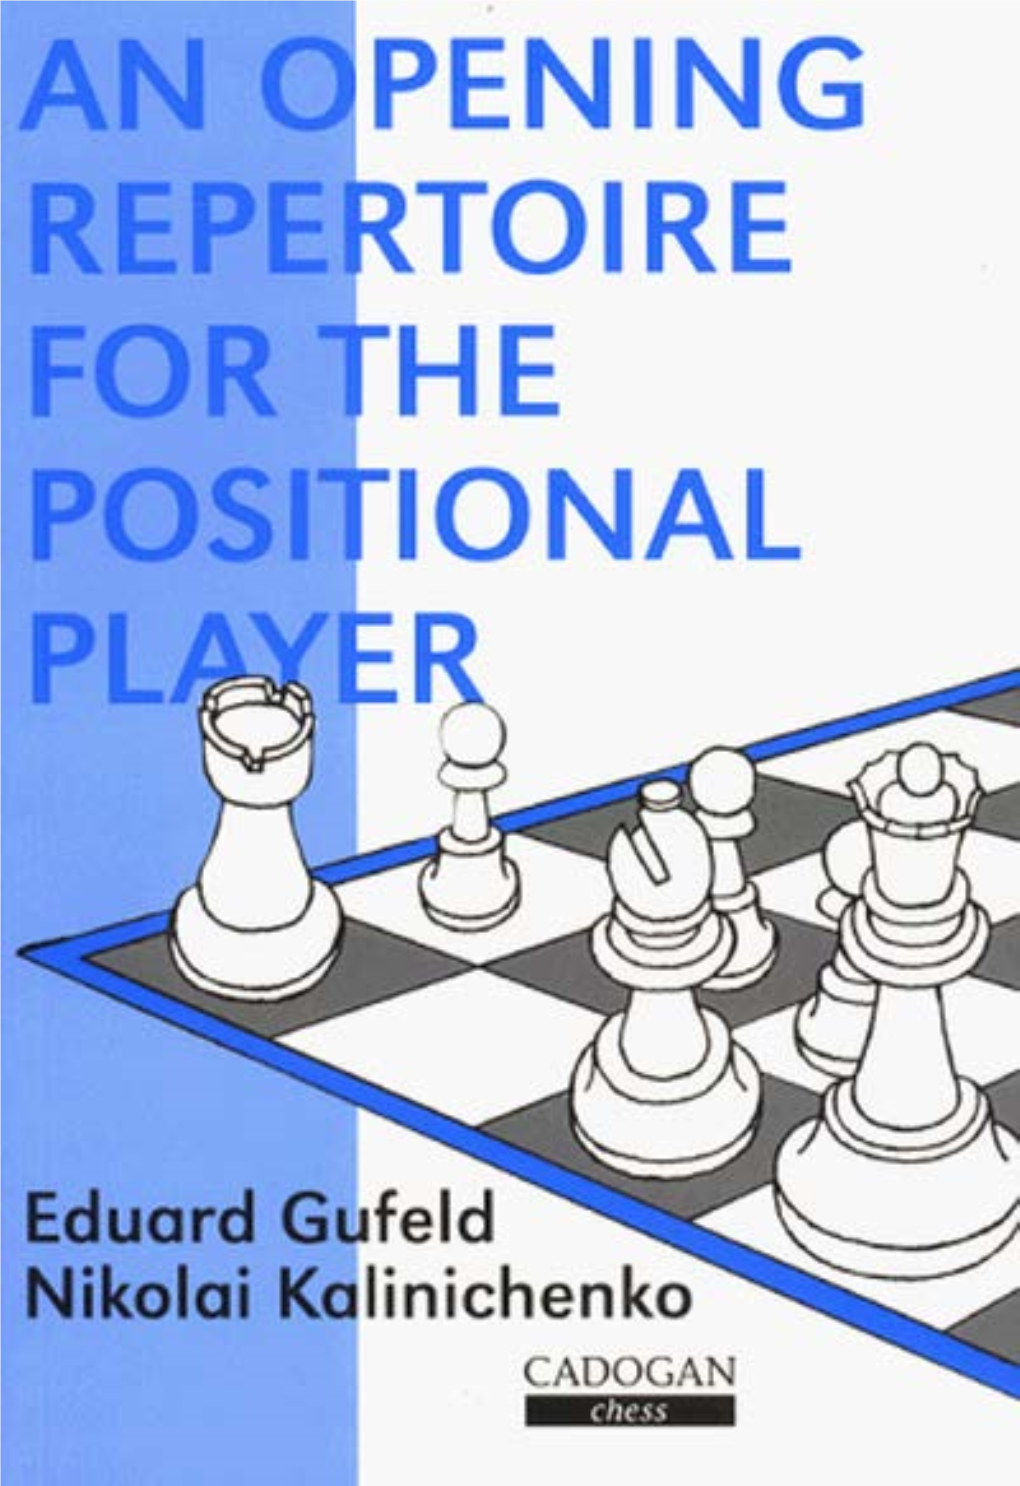 An Opening Repertoire for the Positional Player English Translation Copyright © 1997 Ken Neat